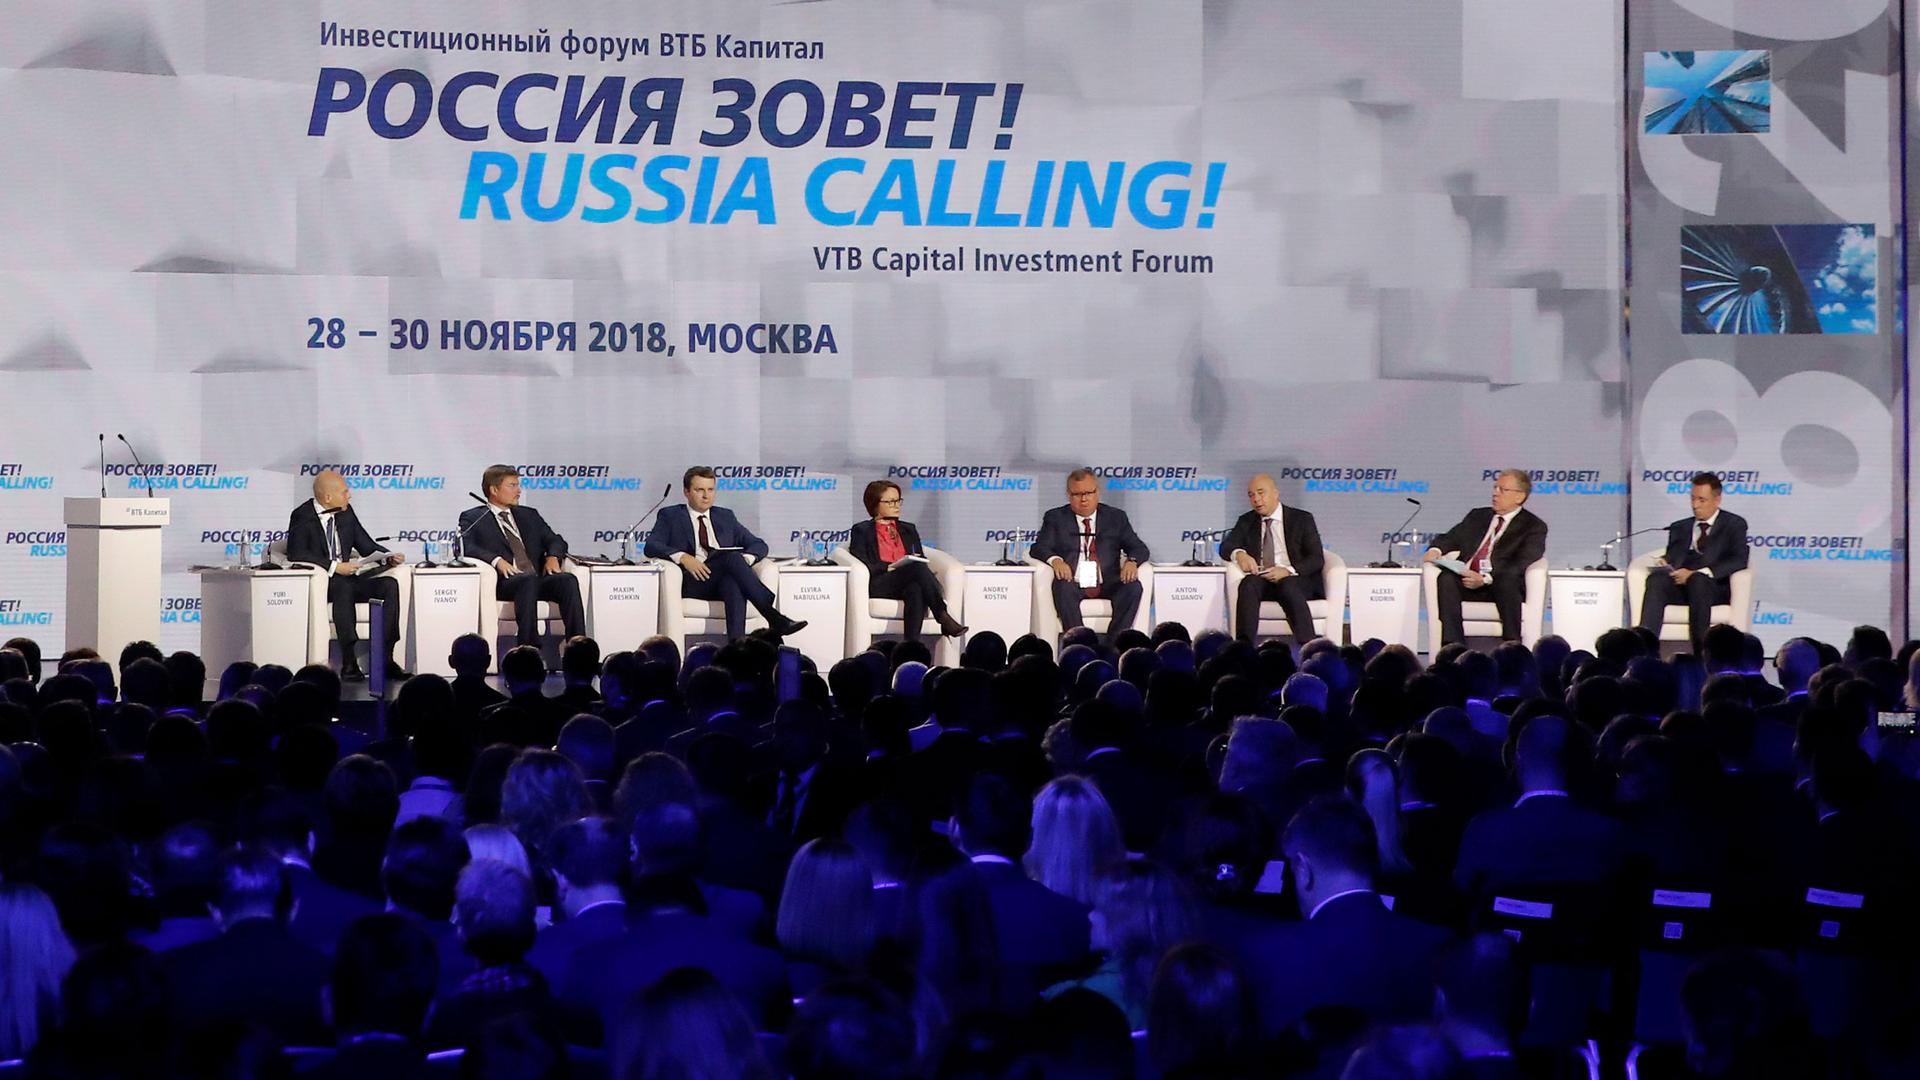 A line of people sit on a panel in front of a large crowd. Behind them, the backdrop says "Russia calling!" 